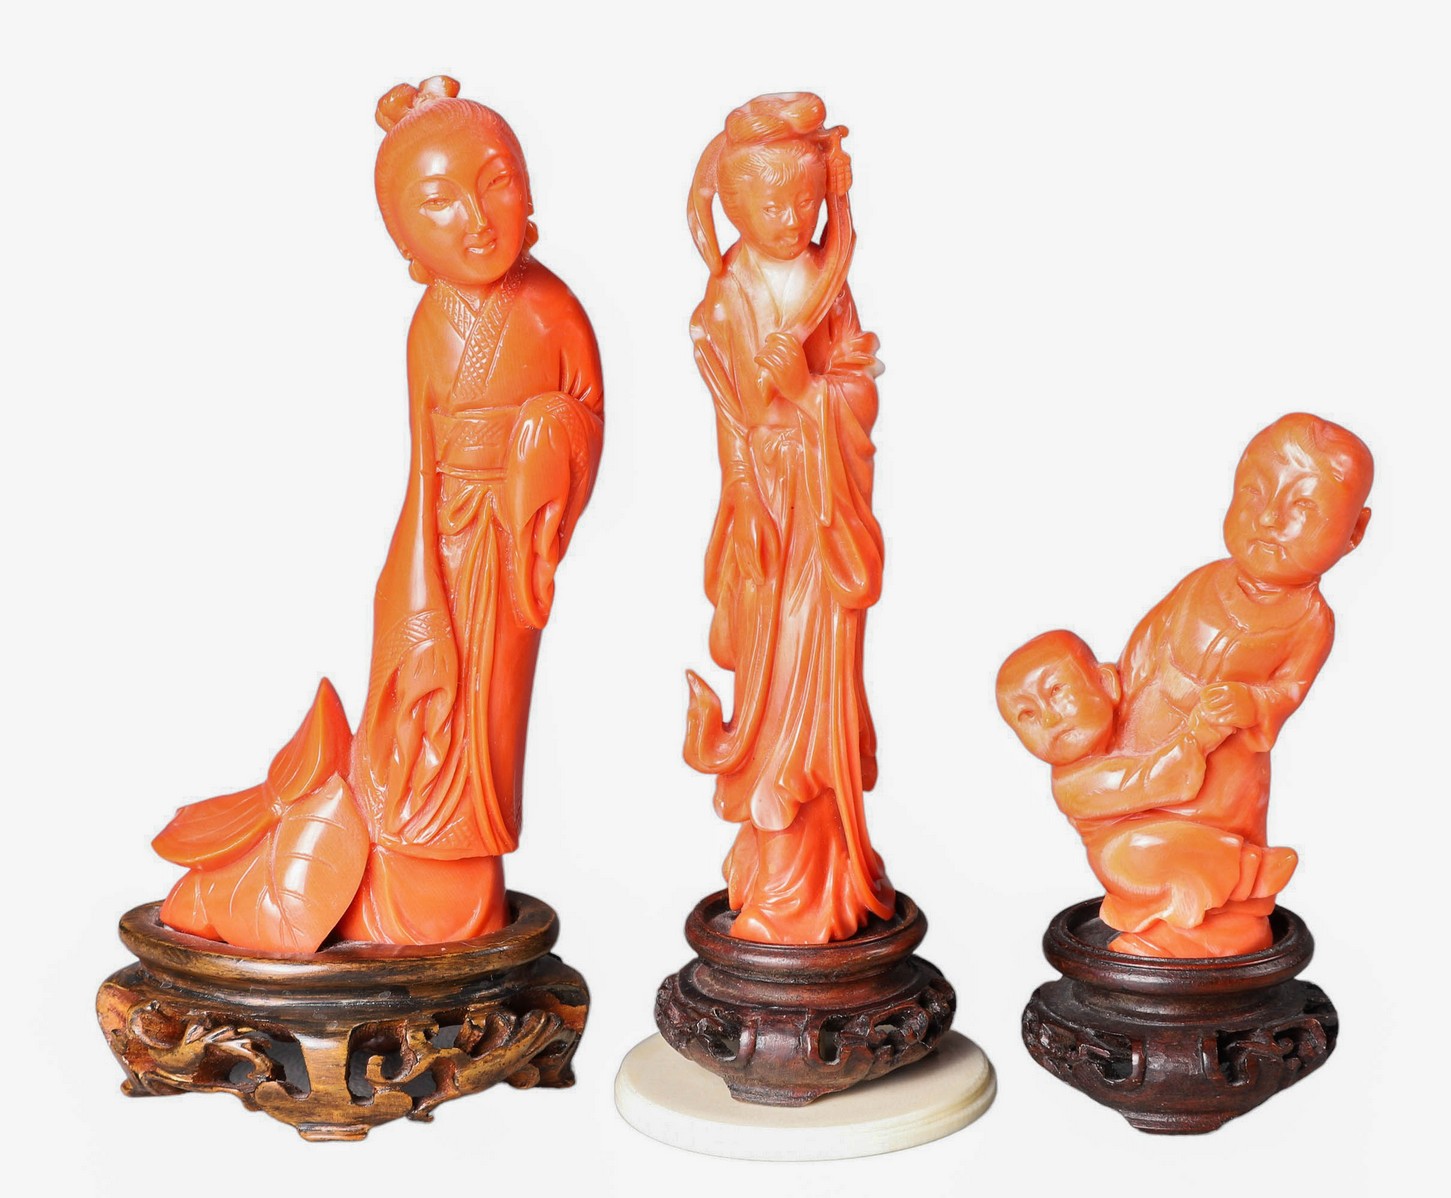  3 Chinese carved coral figures 2e0f65